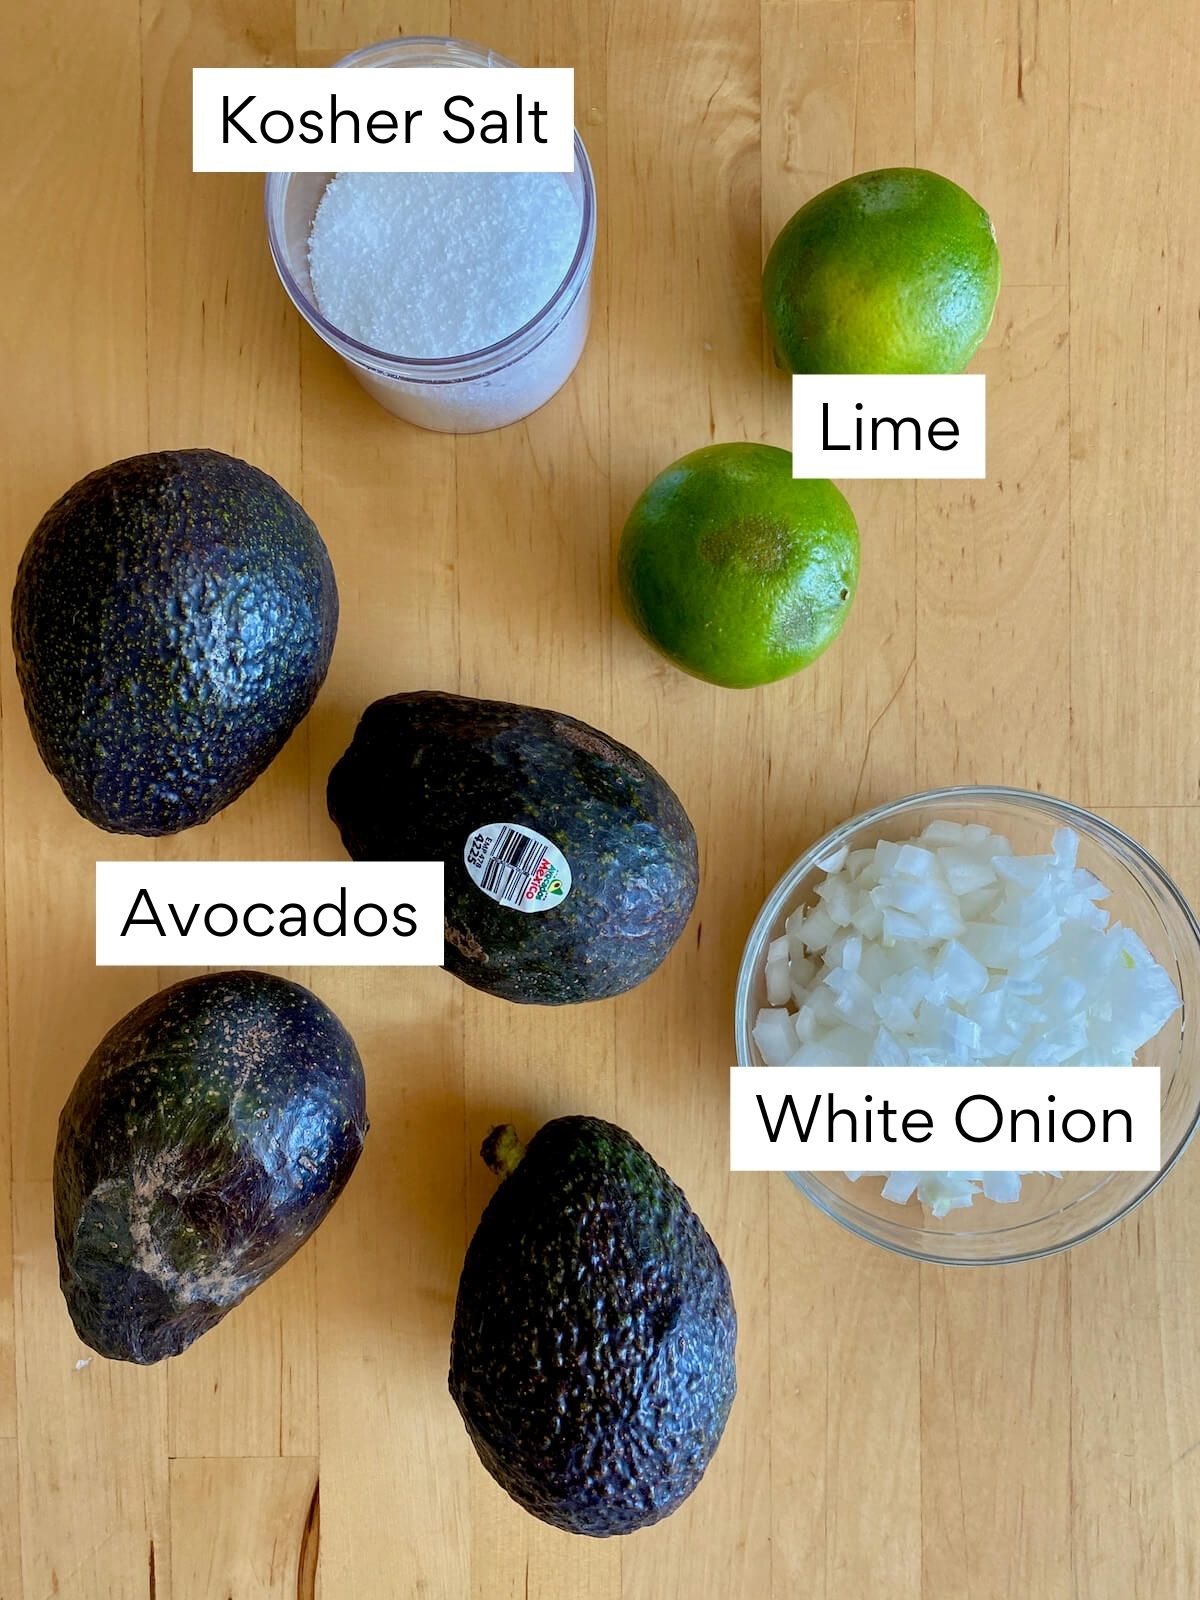 The ingredients to make 4-ingredient guacamole. Each ingredient is labeled with text. They include avocados, white onion, lime, and kosher salt.